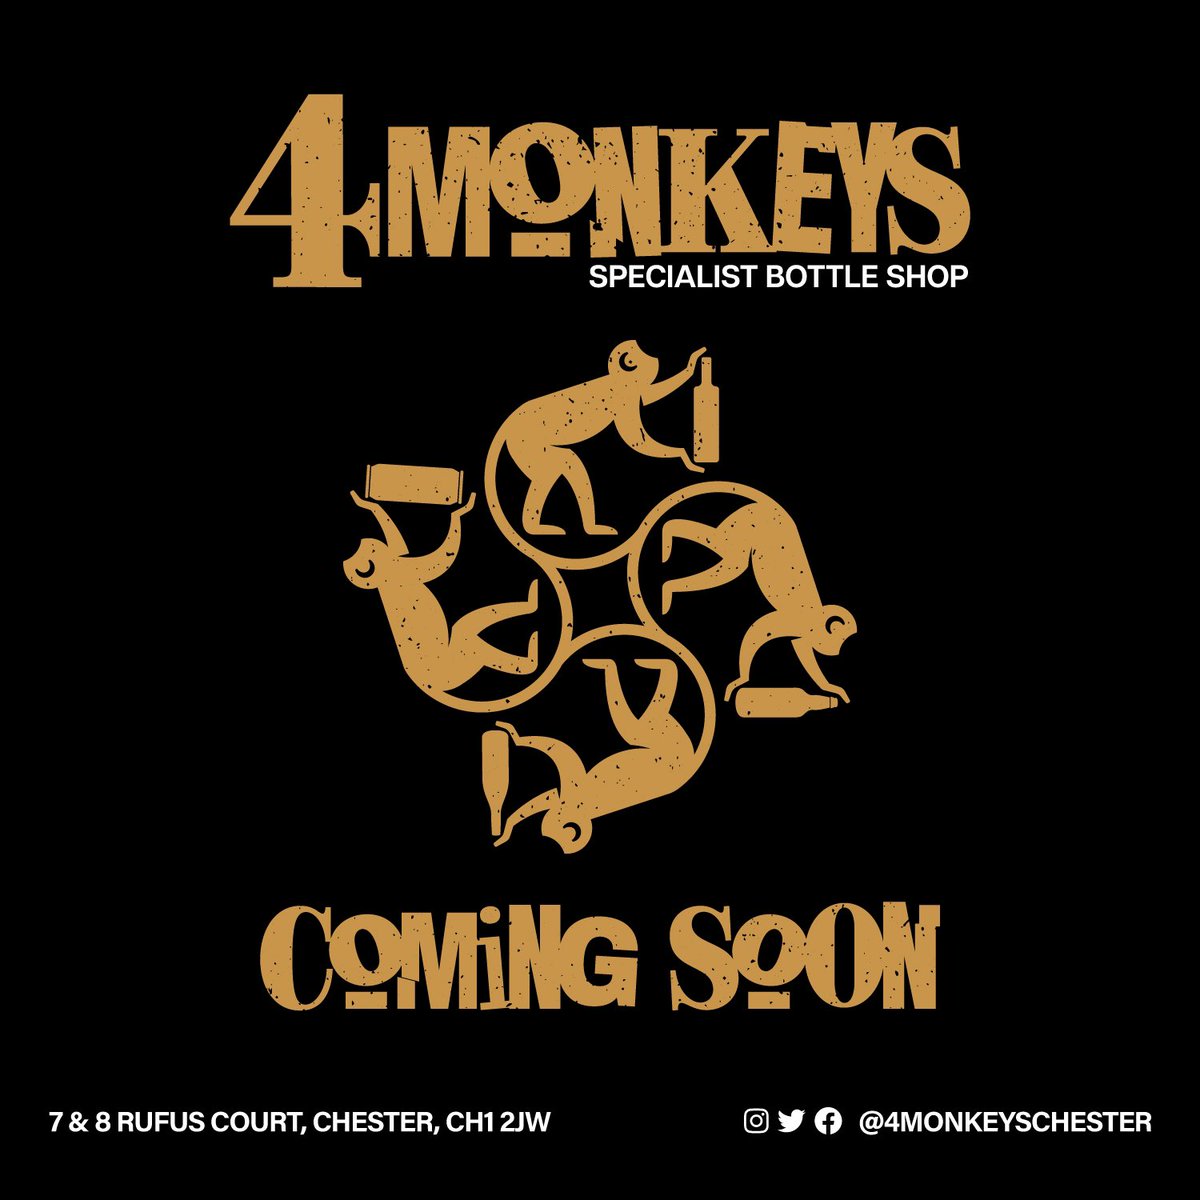 🚨4 Monkeys Chester officially opens its doors on Saturday 2nd December in Rufus Court🚨
Come and explore our range of #craftbeer #craftspirits #craftcider #englishwine #giftsets & more… 🍻🍾
@welovegoodtimes @ShitChester @chesterdotcom @chestertweetsuk @Dee1063 @AlexandersLive